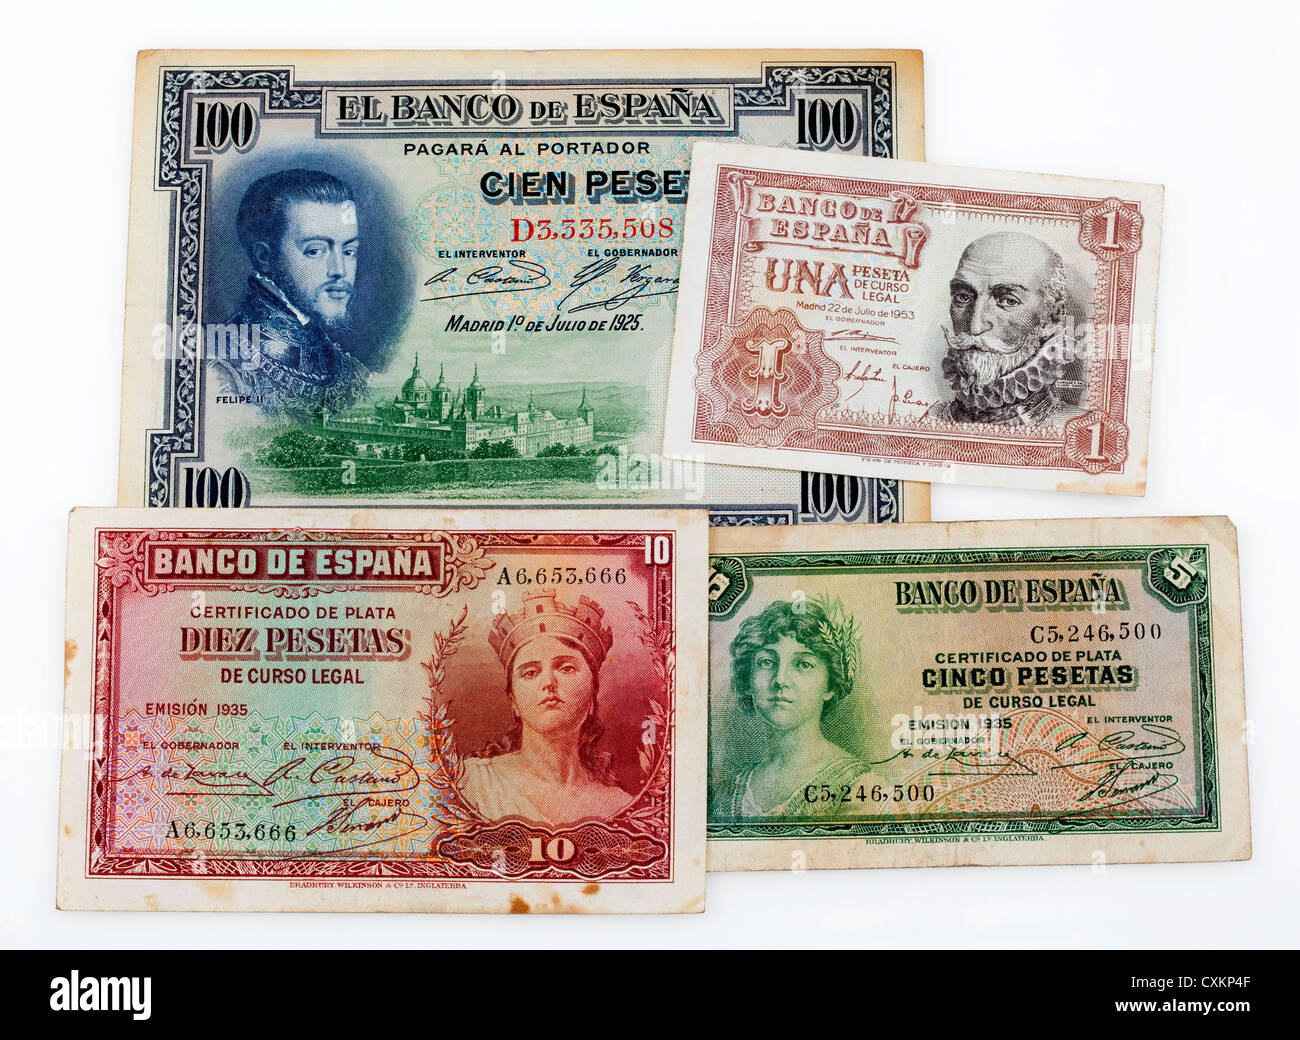 historic bank notes from Spain Stock Photo